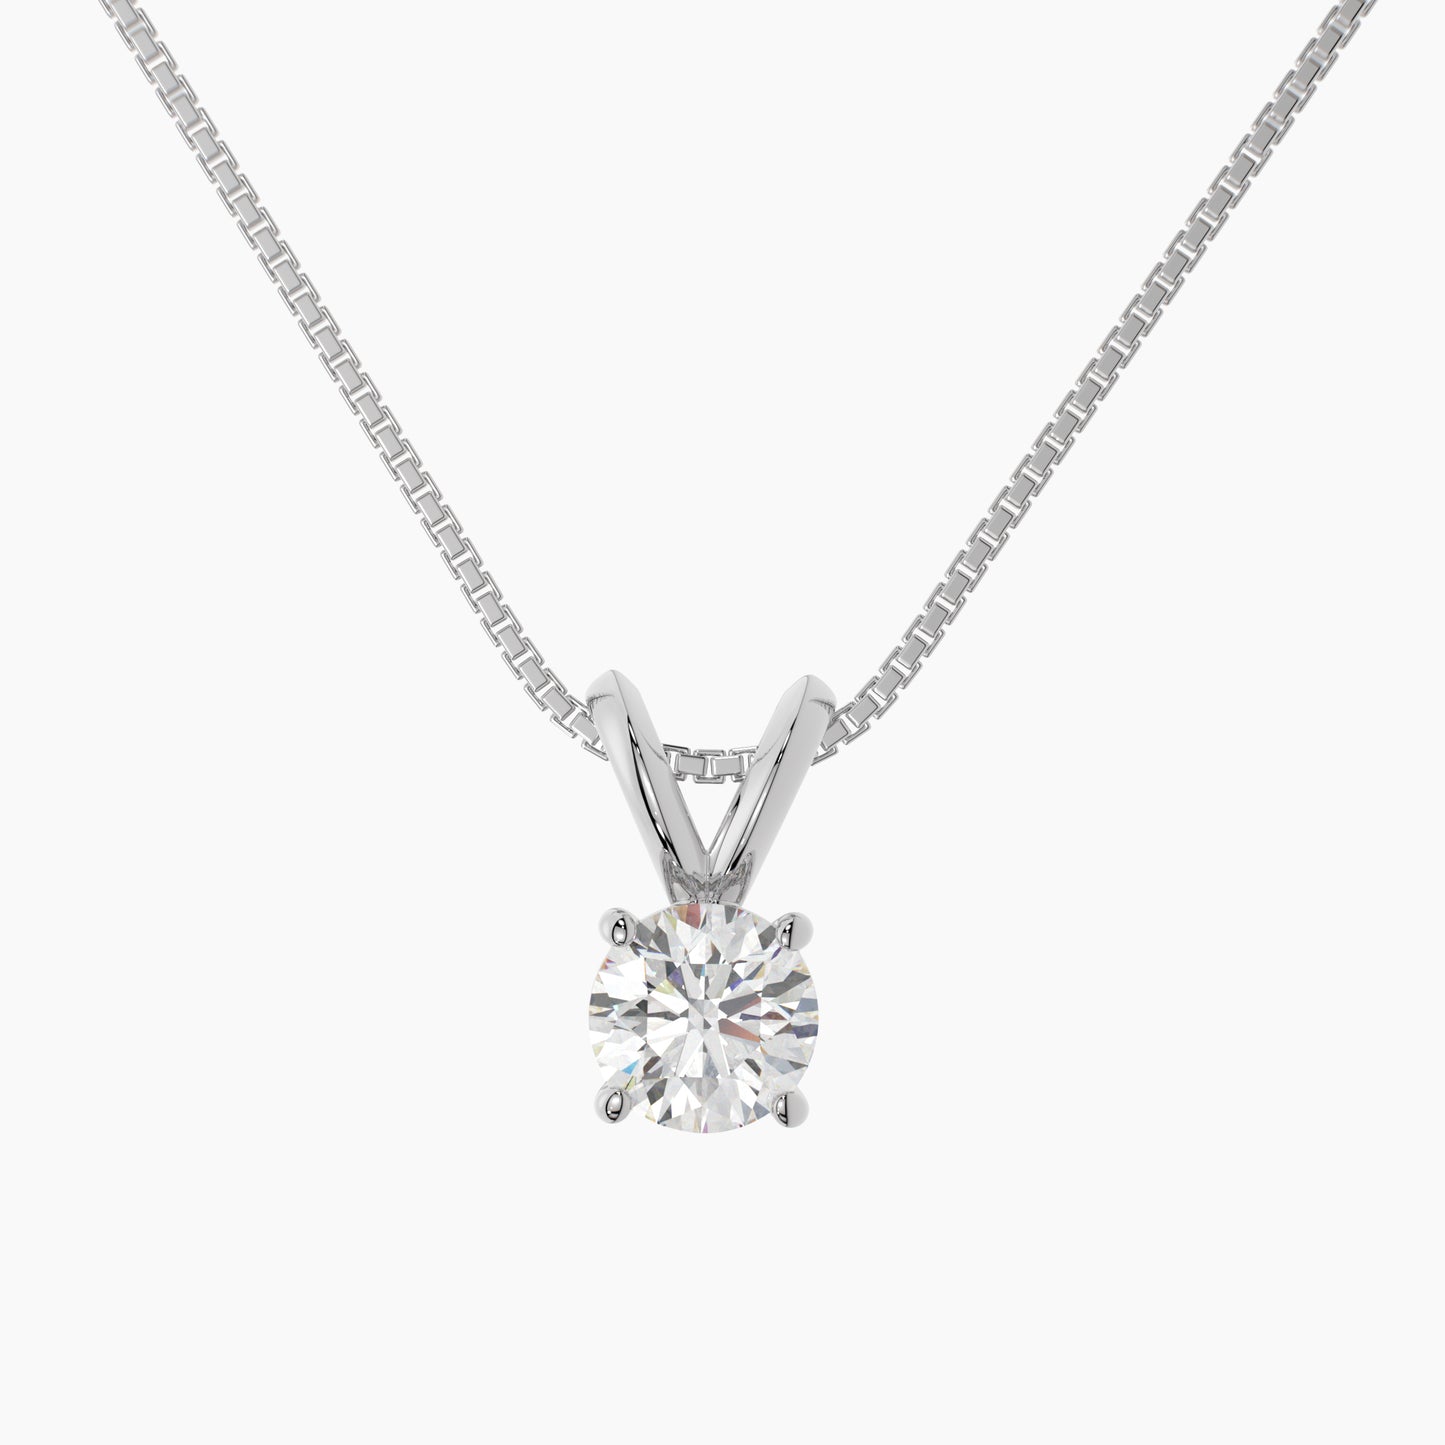 14K White Gold Moissanite Round Cut Pendant Necklace | Rabbit Ear Bail | 0.75 or 2.0 CTW | 16 or 18 Inch .80mm Box Link